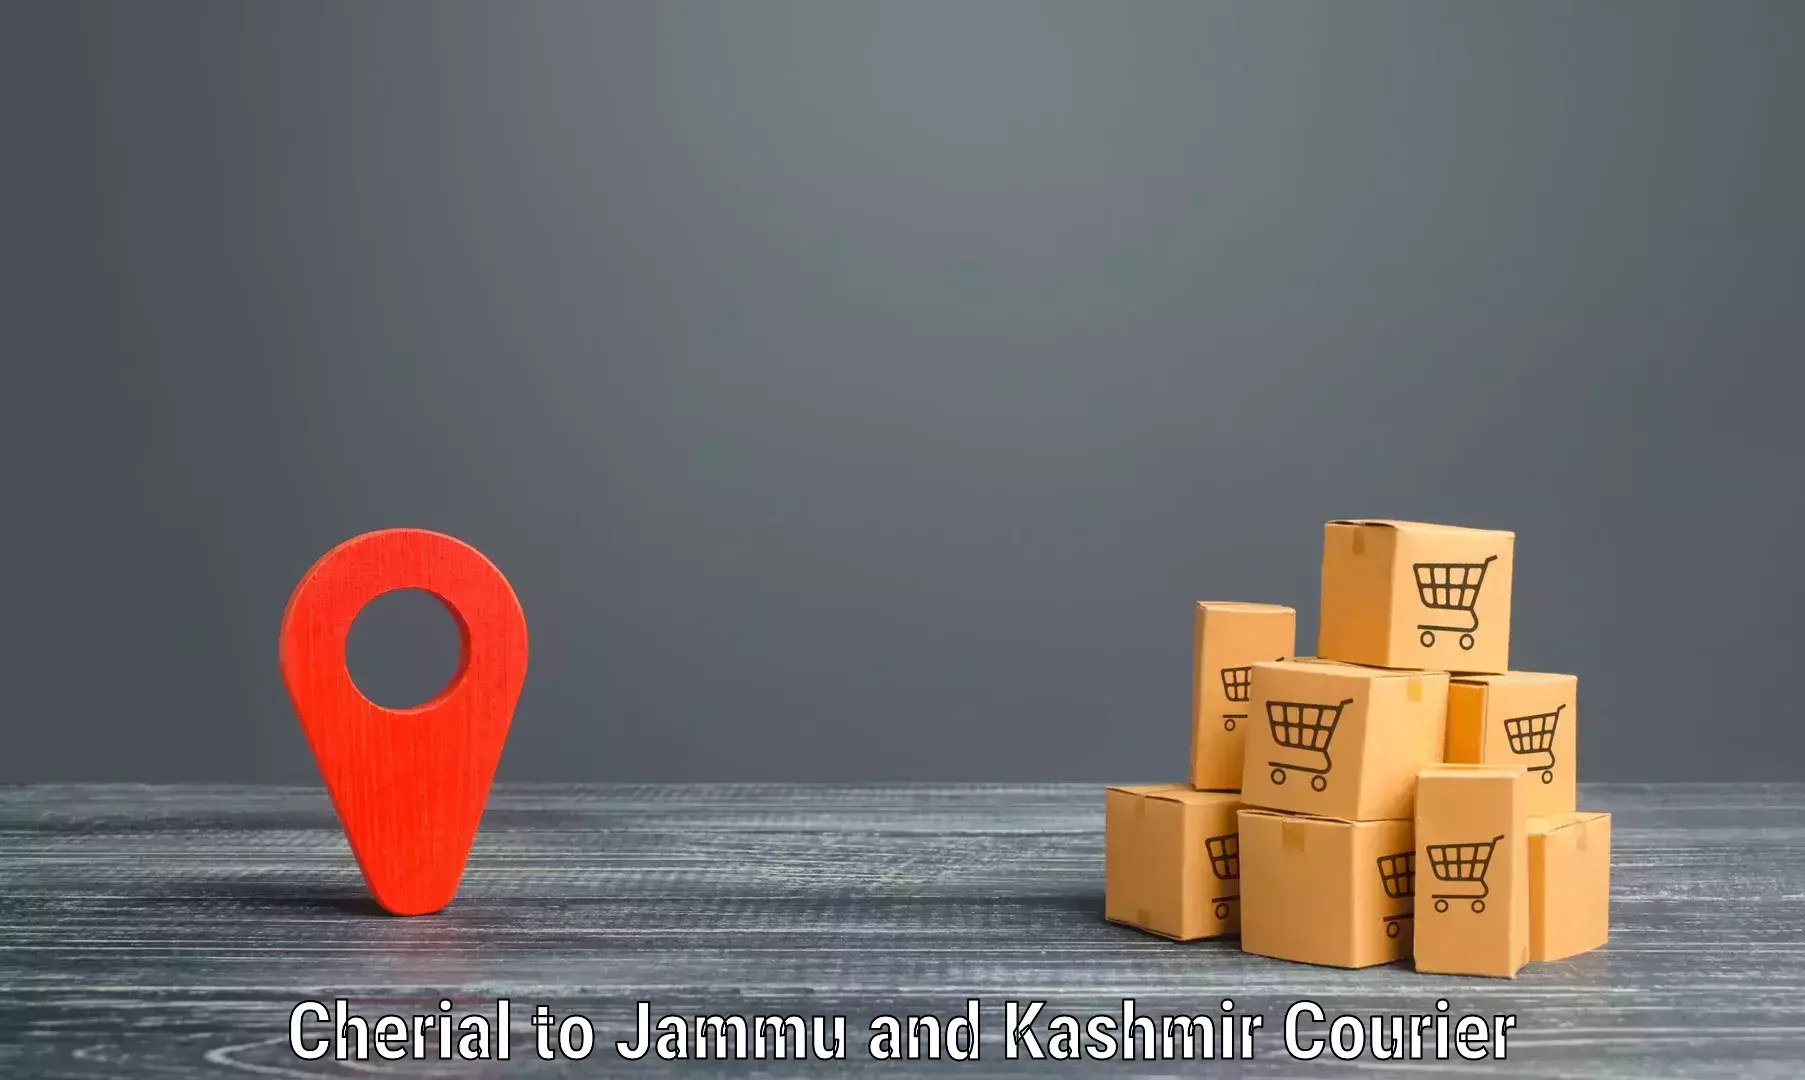 Express mail solutions Cherial to University of Jammu